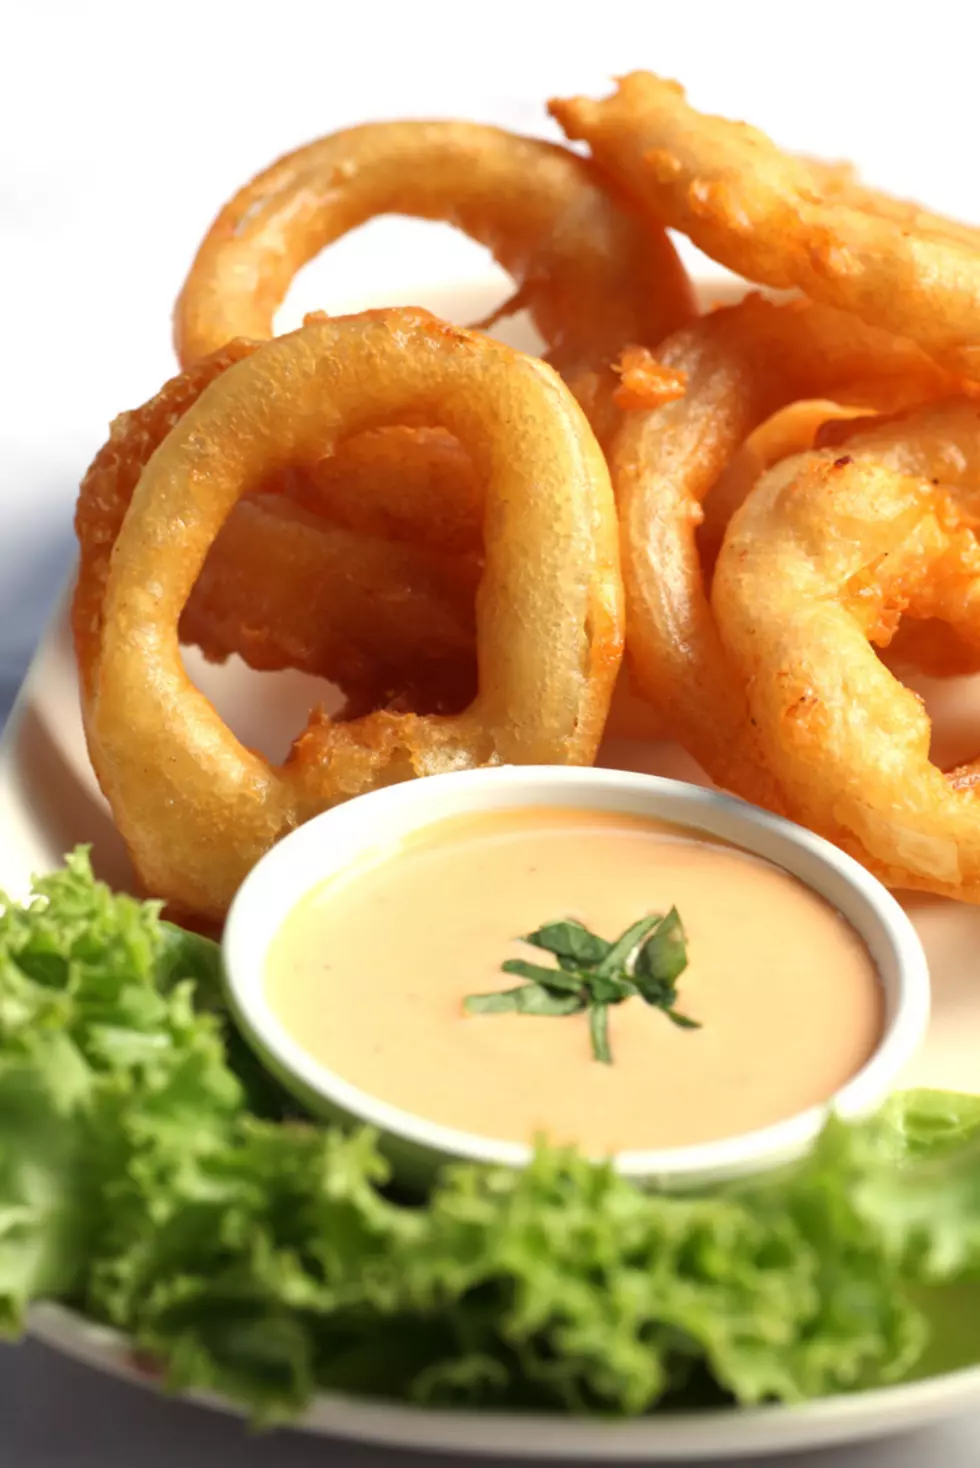 Yelp! Best Places For Onion Rings In the Greater Binghamton Area